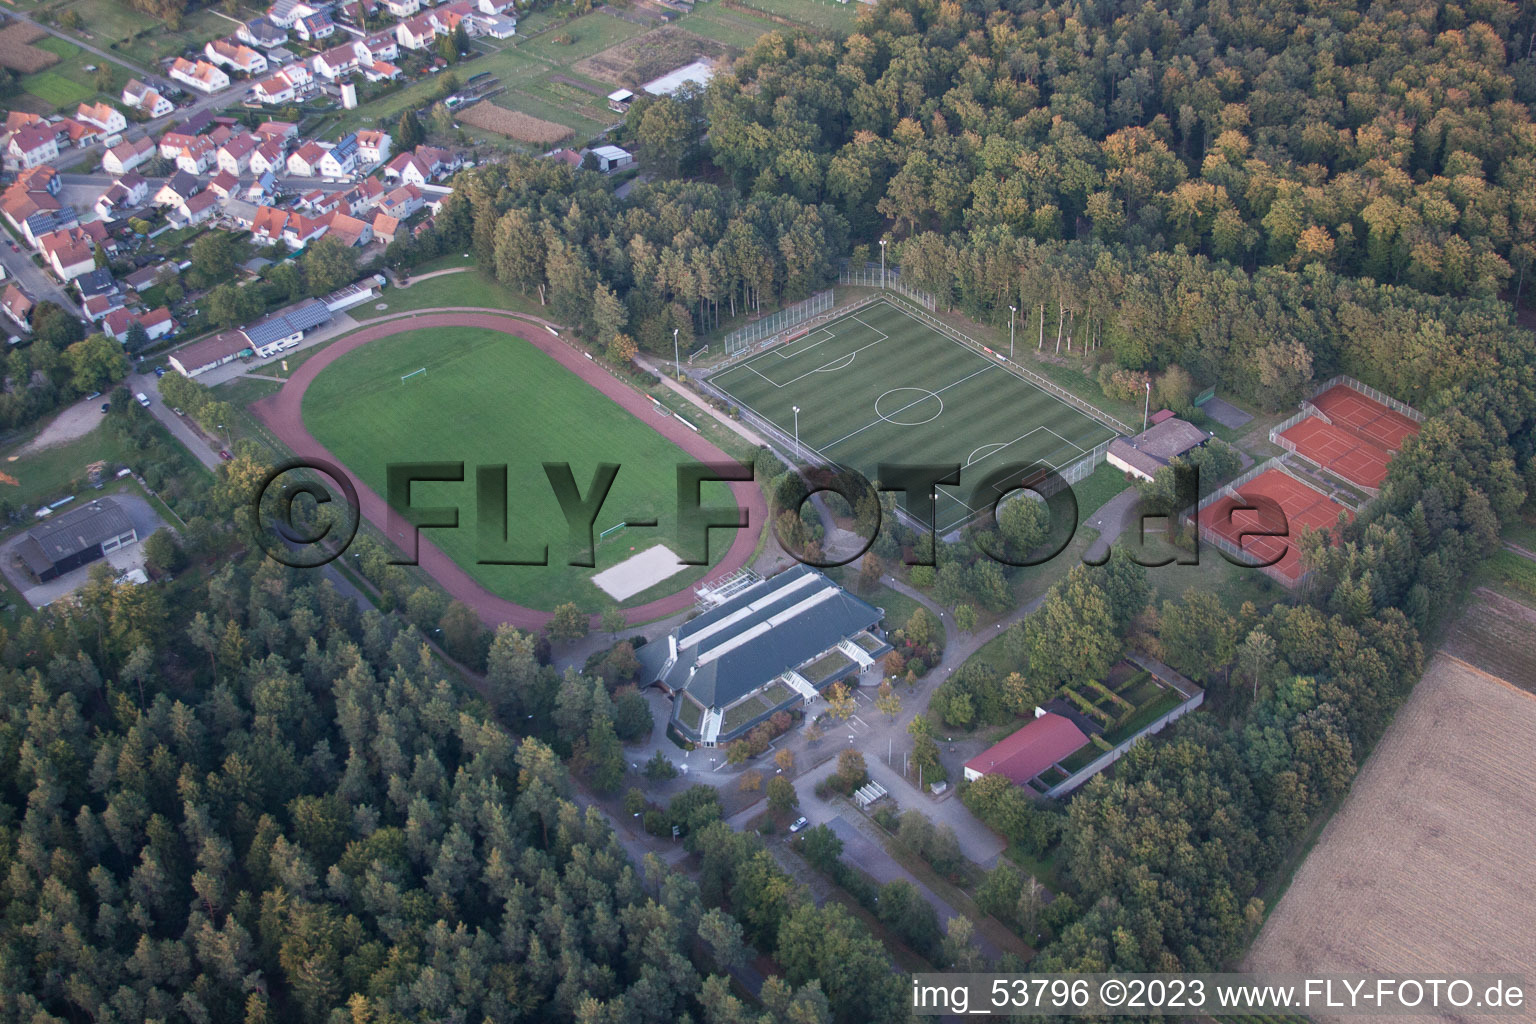 Sports facilities in the district Schaidt in Wörth am Rhein in the state Rhineland-Palatinate, Germany